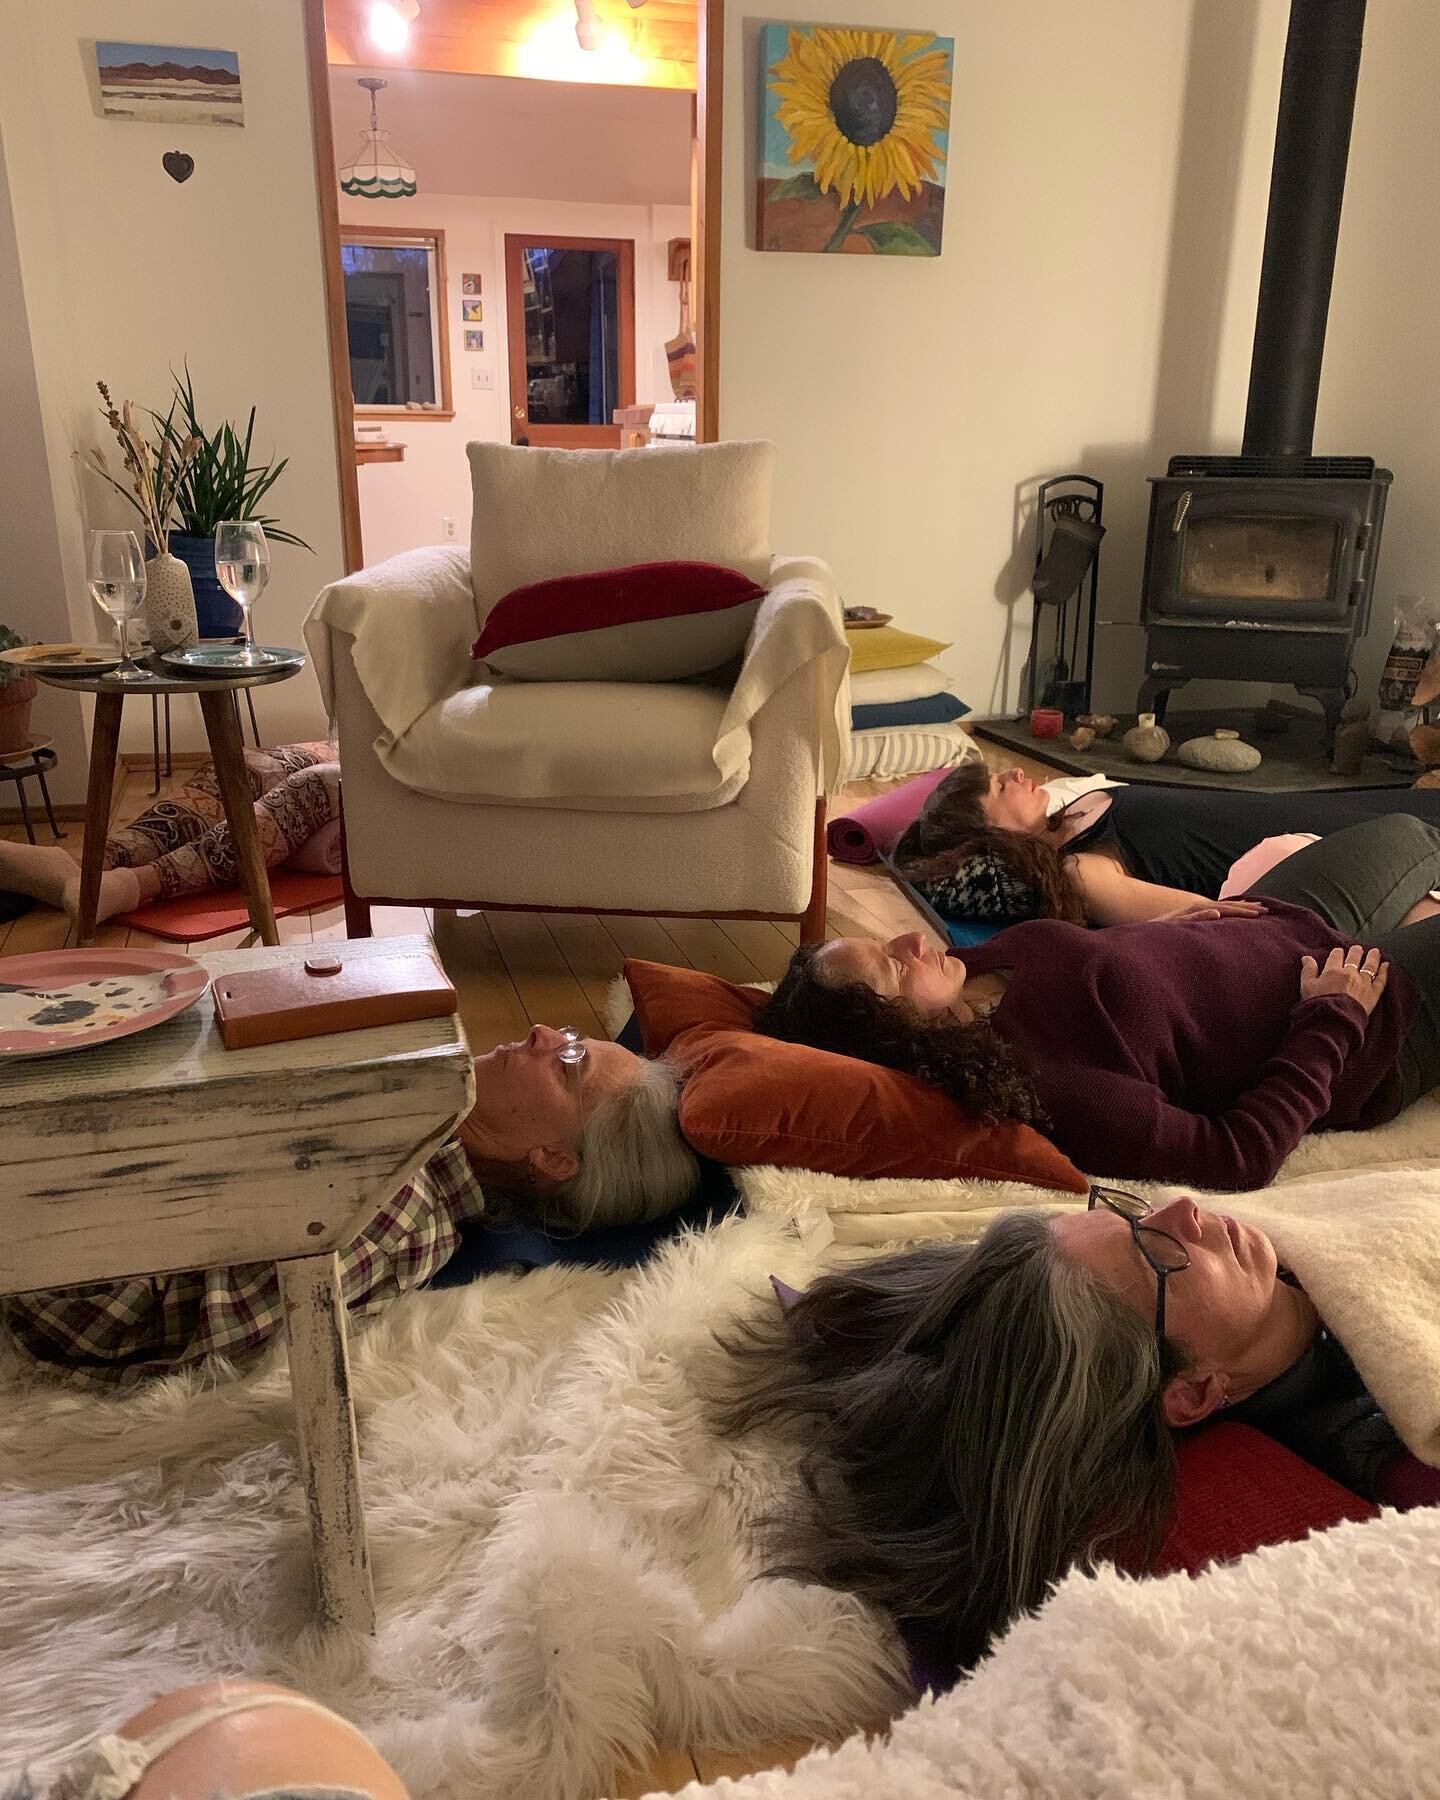 A wonderful night of interesting conversation, amazing desserts and joyful connection. I facilitated a body scan exercise for the full moon as part of the festivities and am filled with gratitude and awe at how rich, meaningful and different everyone